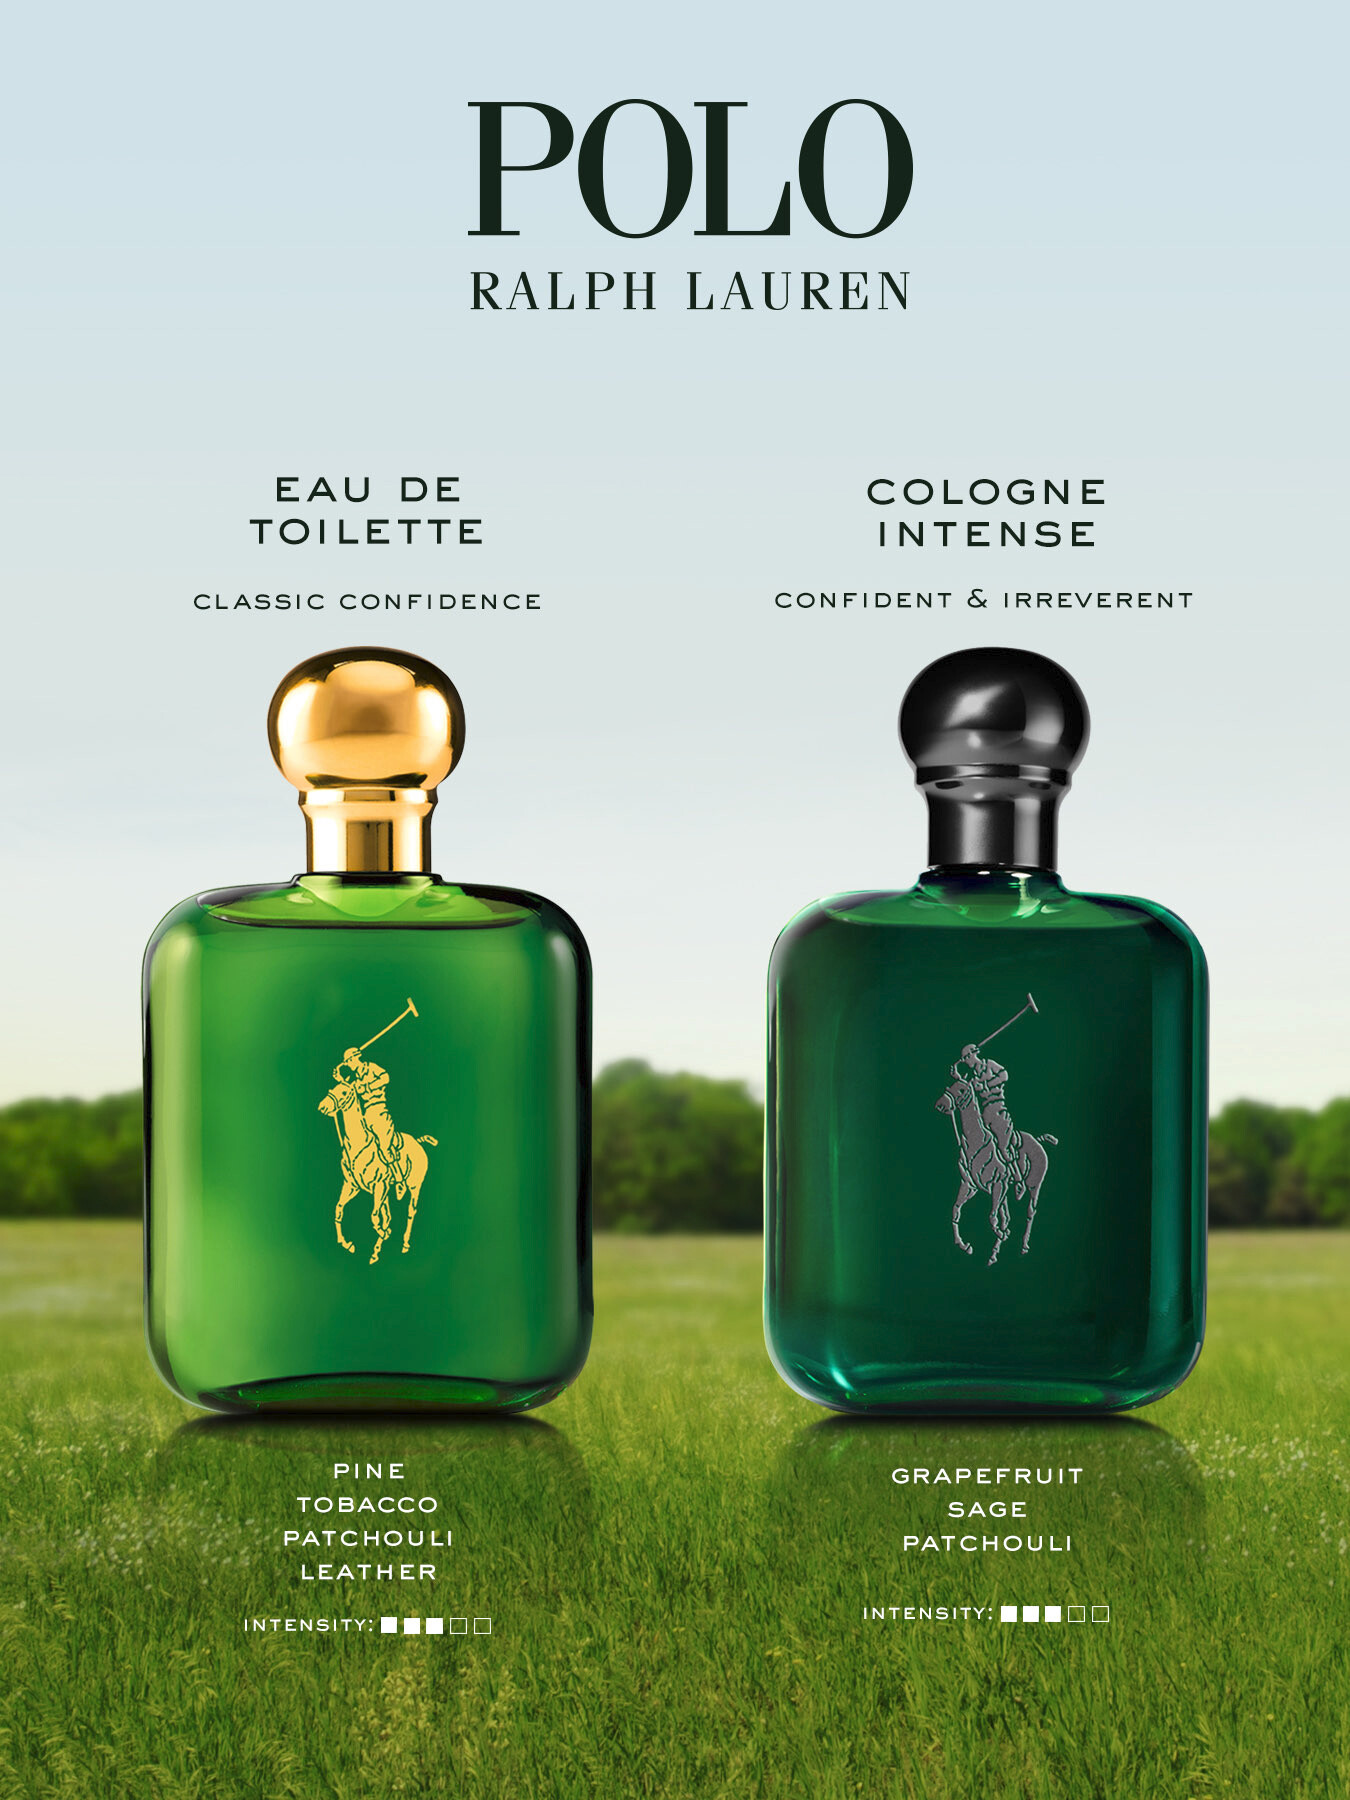 Ralph Lauren Polo Cologne Intense Spray Aromatic Fougere